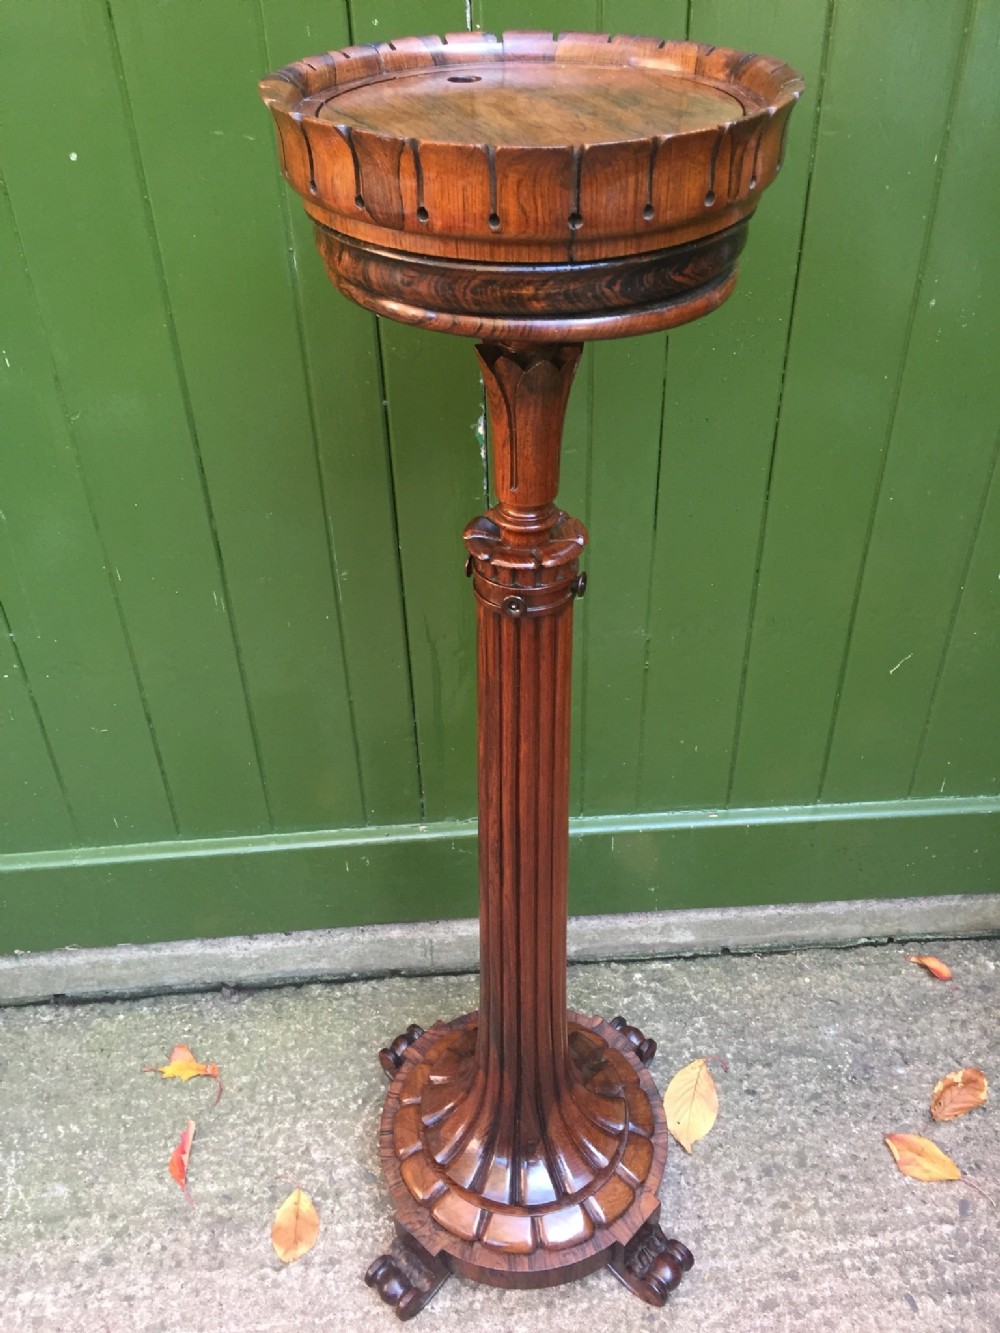 rare early c19th george iv period carved rosewood jardiniere stand or crocus table in the manner of the cabinetmaker thomas king 17901839